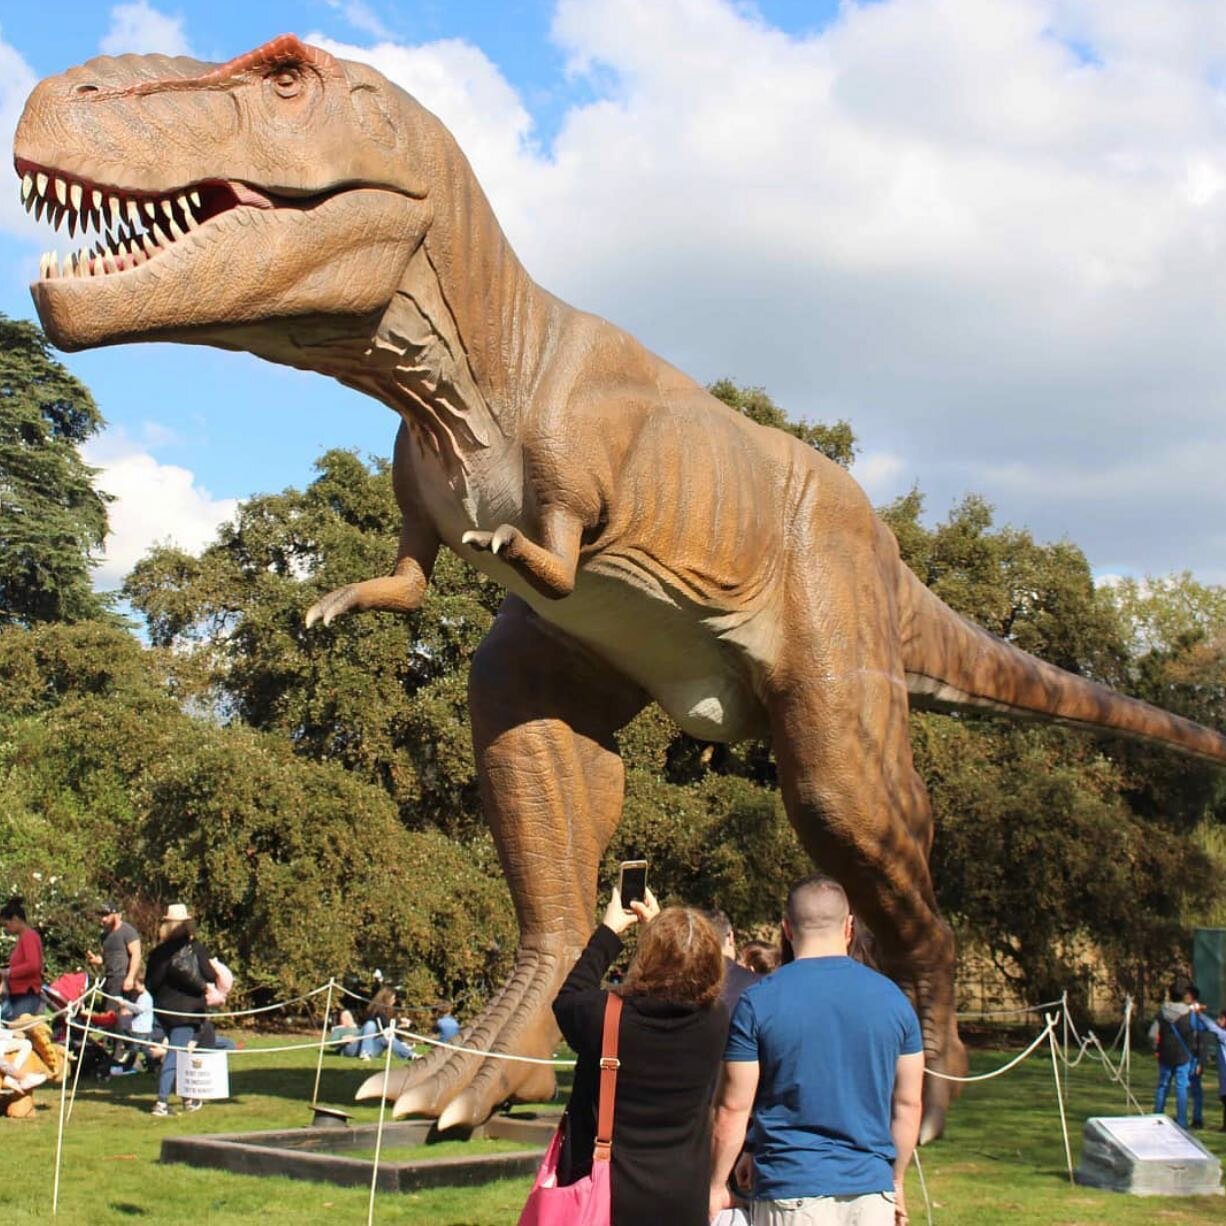 The cat is out of the bag. We will be serving our best chocolate treats, coffees, ice creams and smiles at the biggest summer outdoor dinosaur gathering;) @jurassicencounter2021 brings to London  life-sized dinosaurs. Staycations never sound this exc